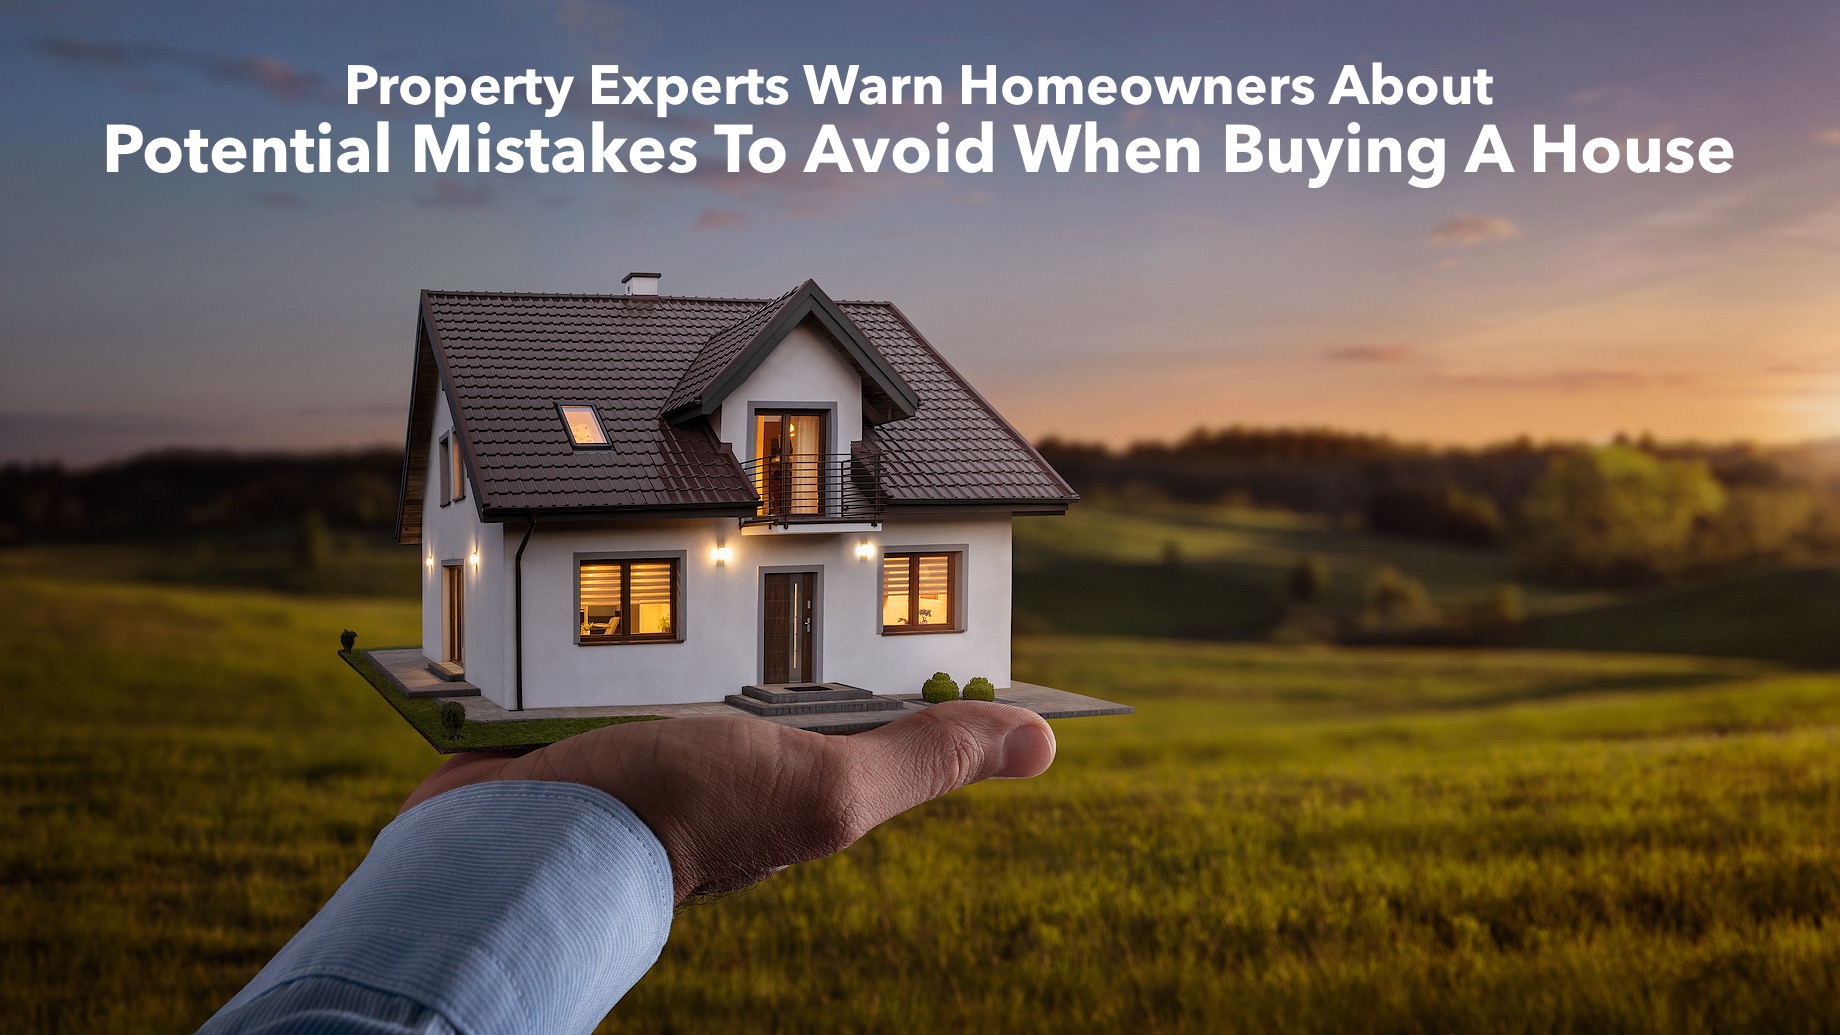 Property Experts Warn Homeowners About Potential Mistakes To Avoid When Buying A House